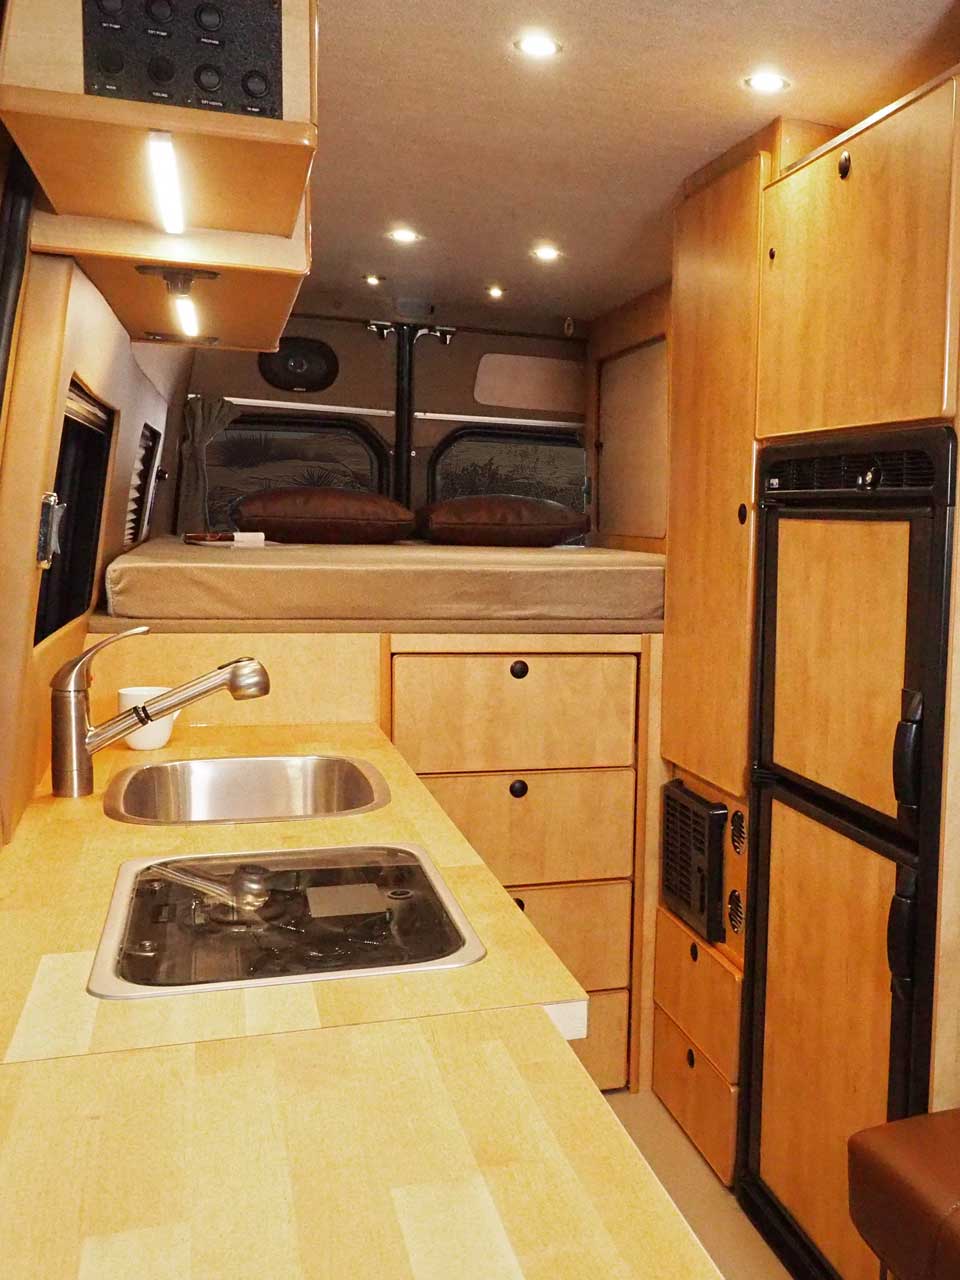 Sprinter interior with maple cabinets and a refrigerator.